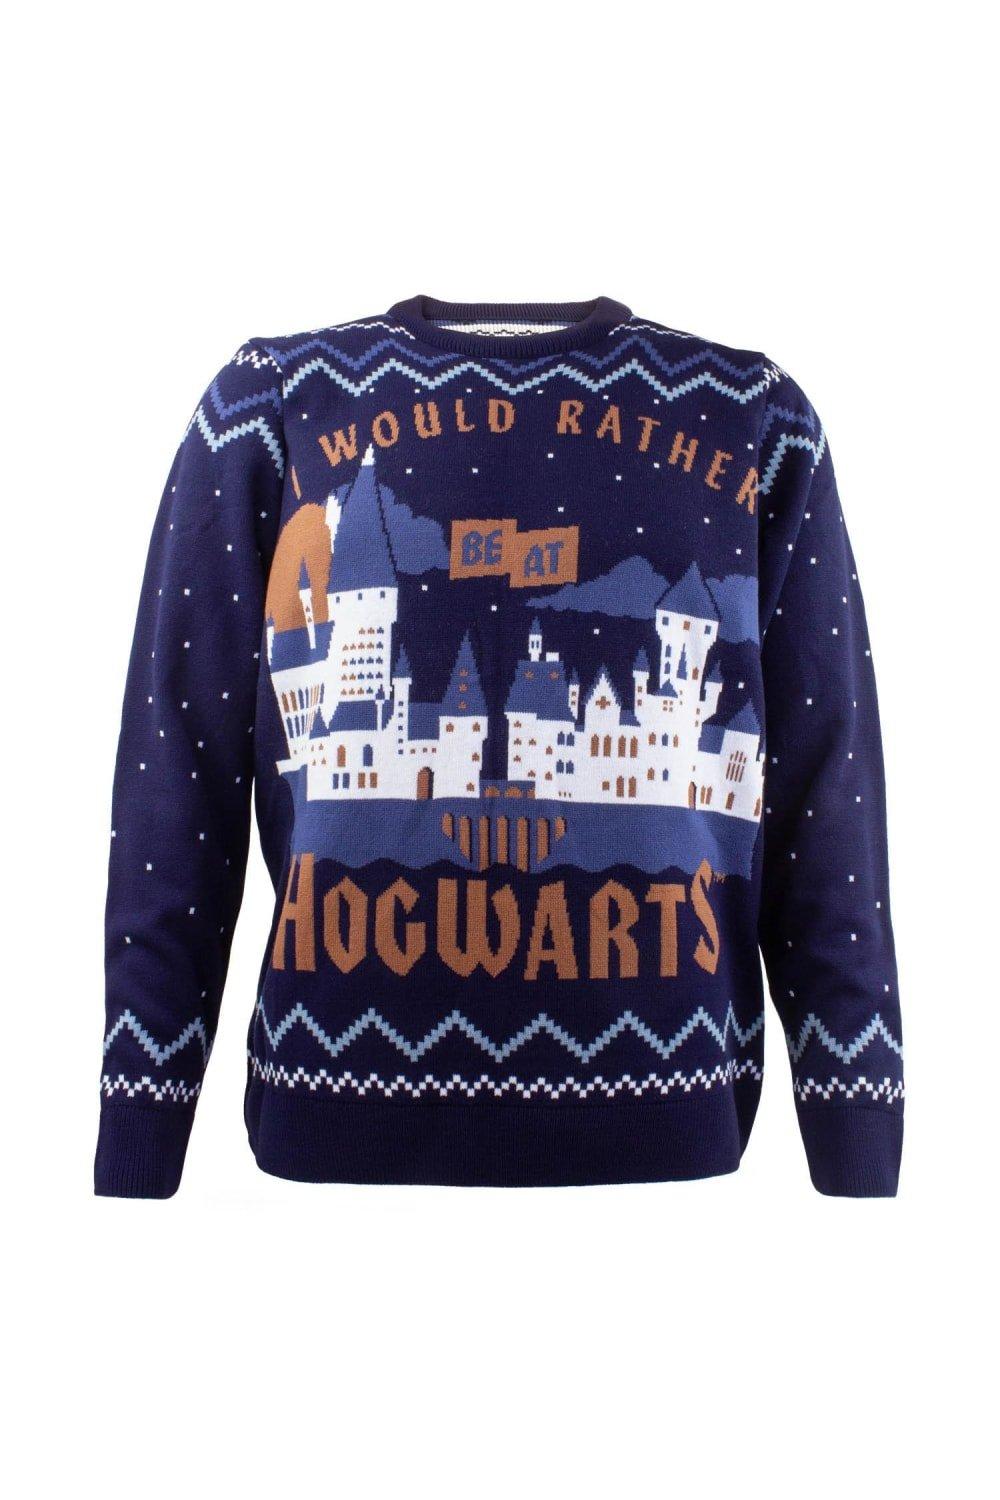 Rather Be At Hogwarts Knitted Jumper